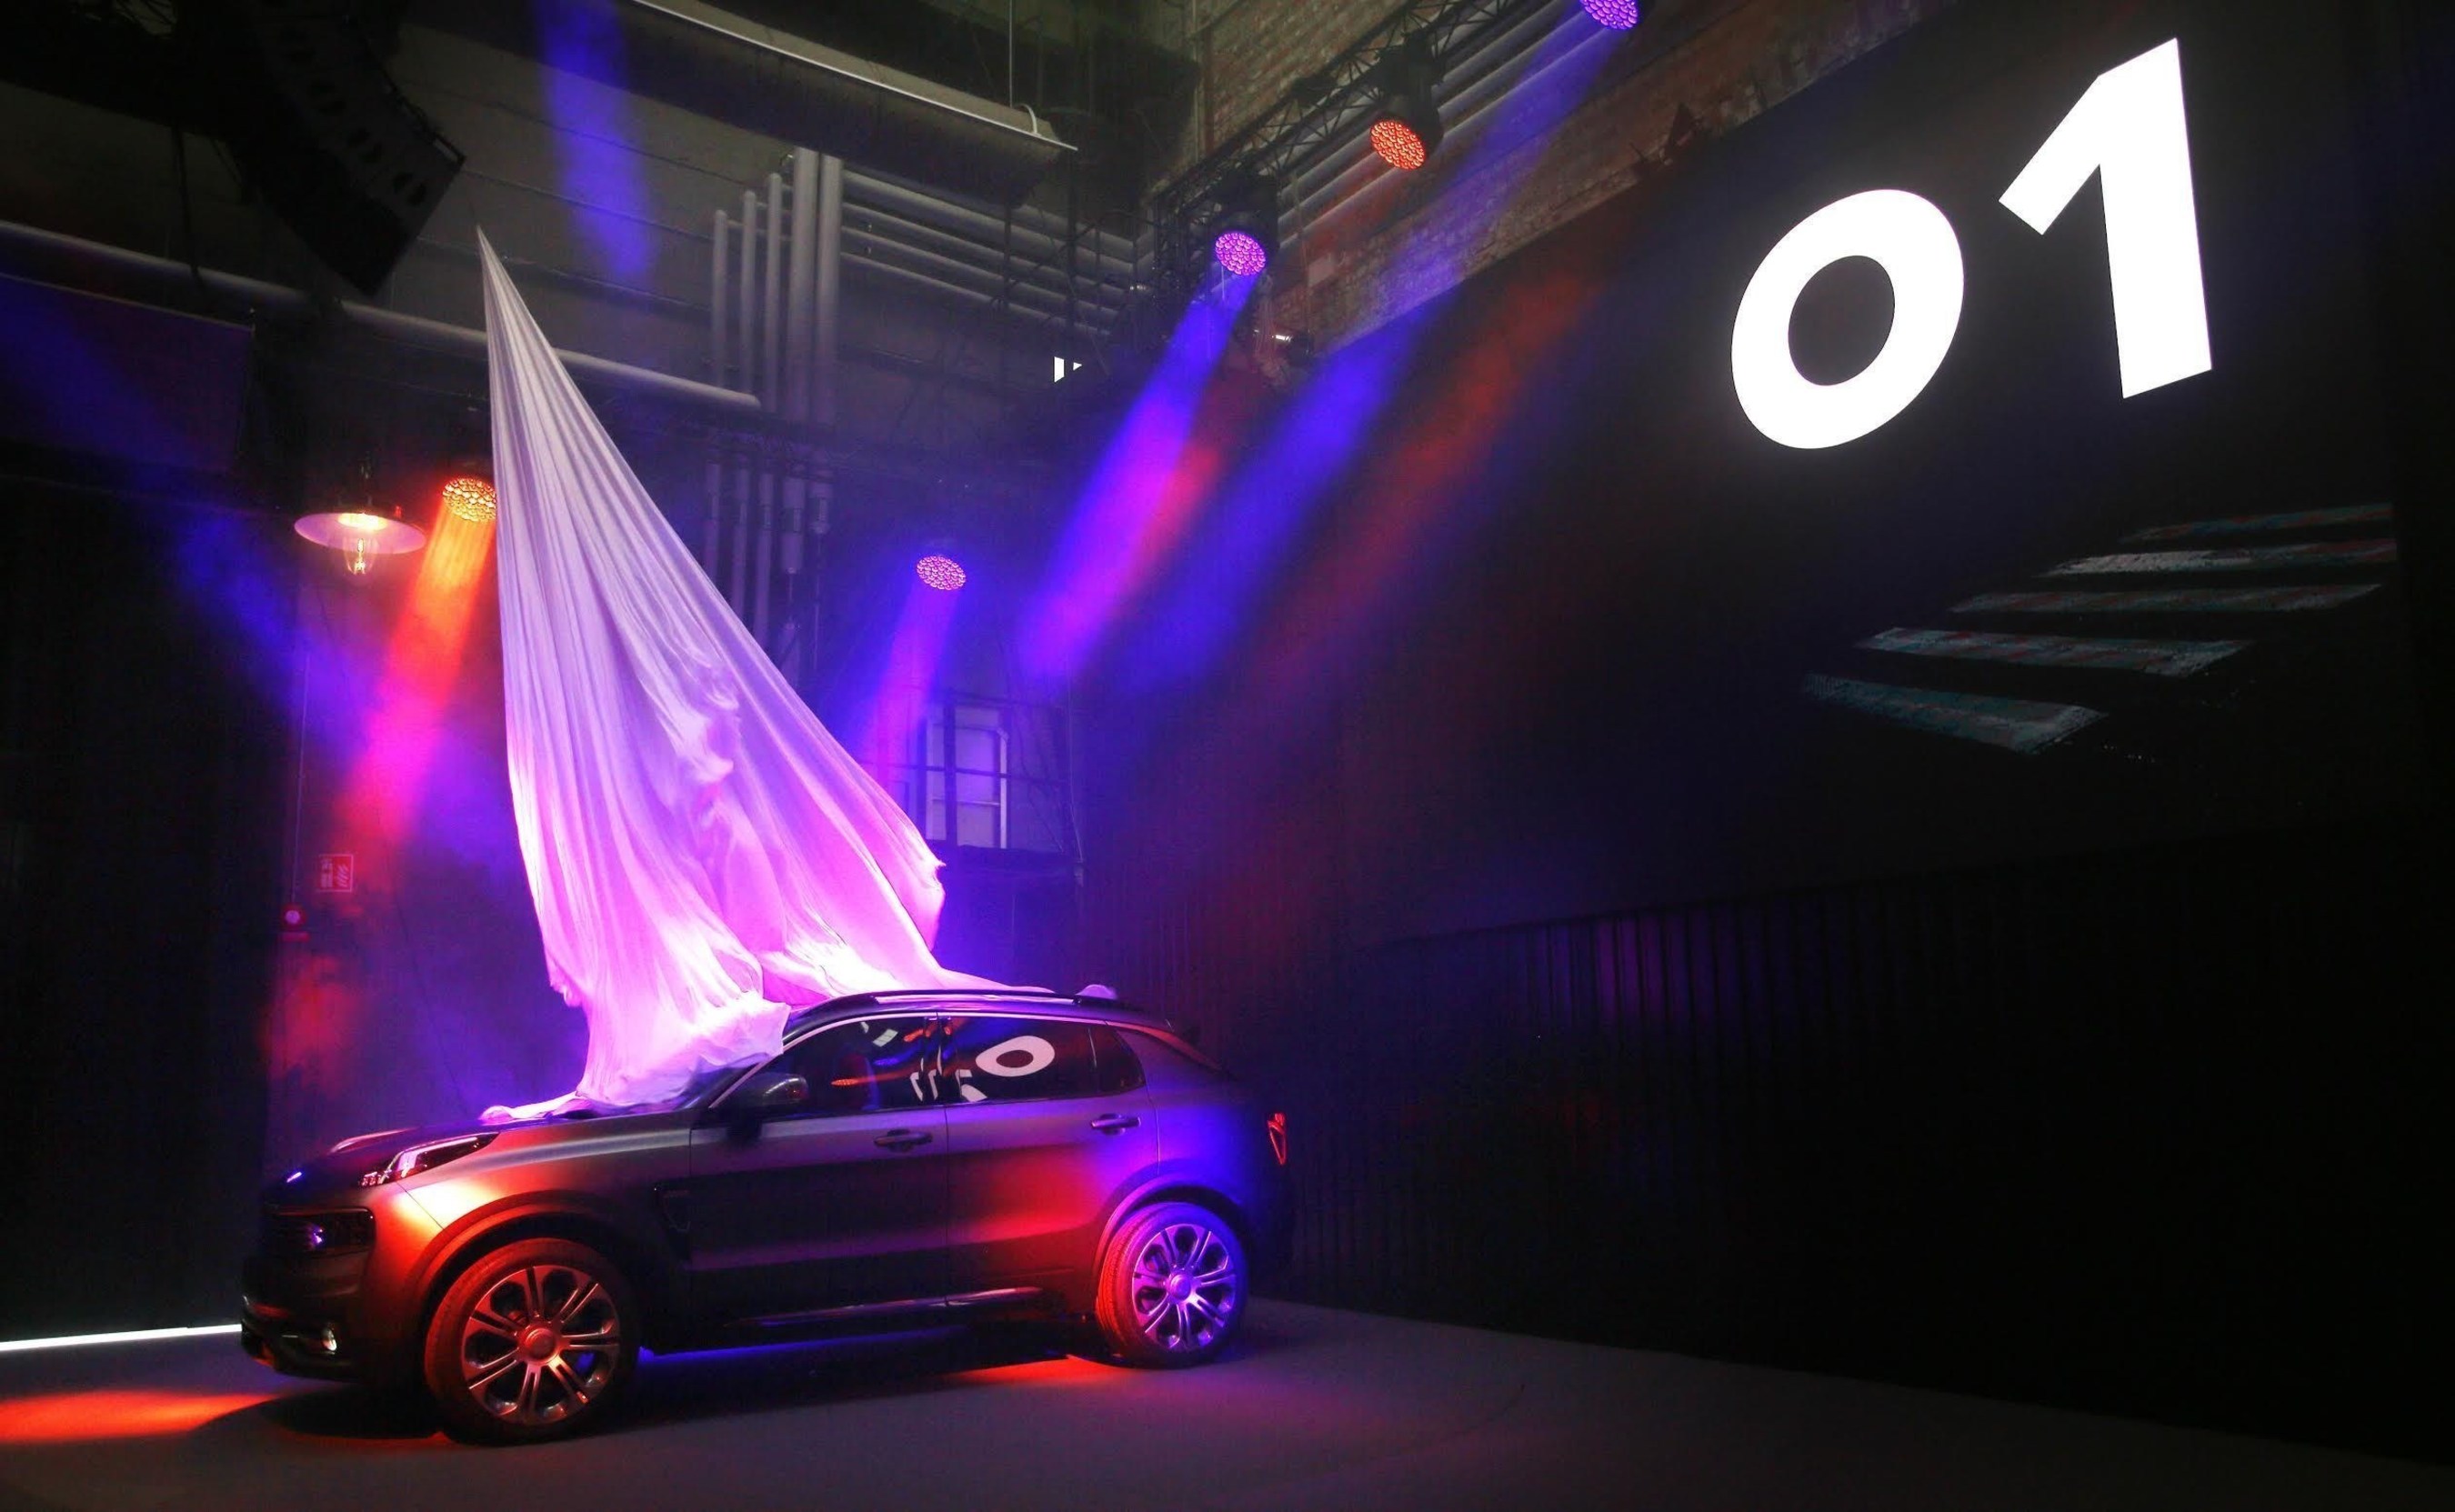 The LYNK & CO 01 is revealed to the world's media in Gothenburg (PRNewsFoto/LYNK & CO)